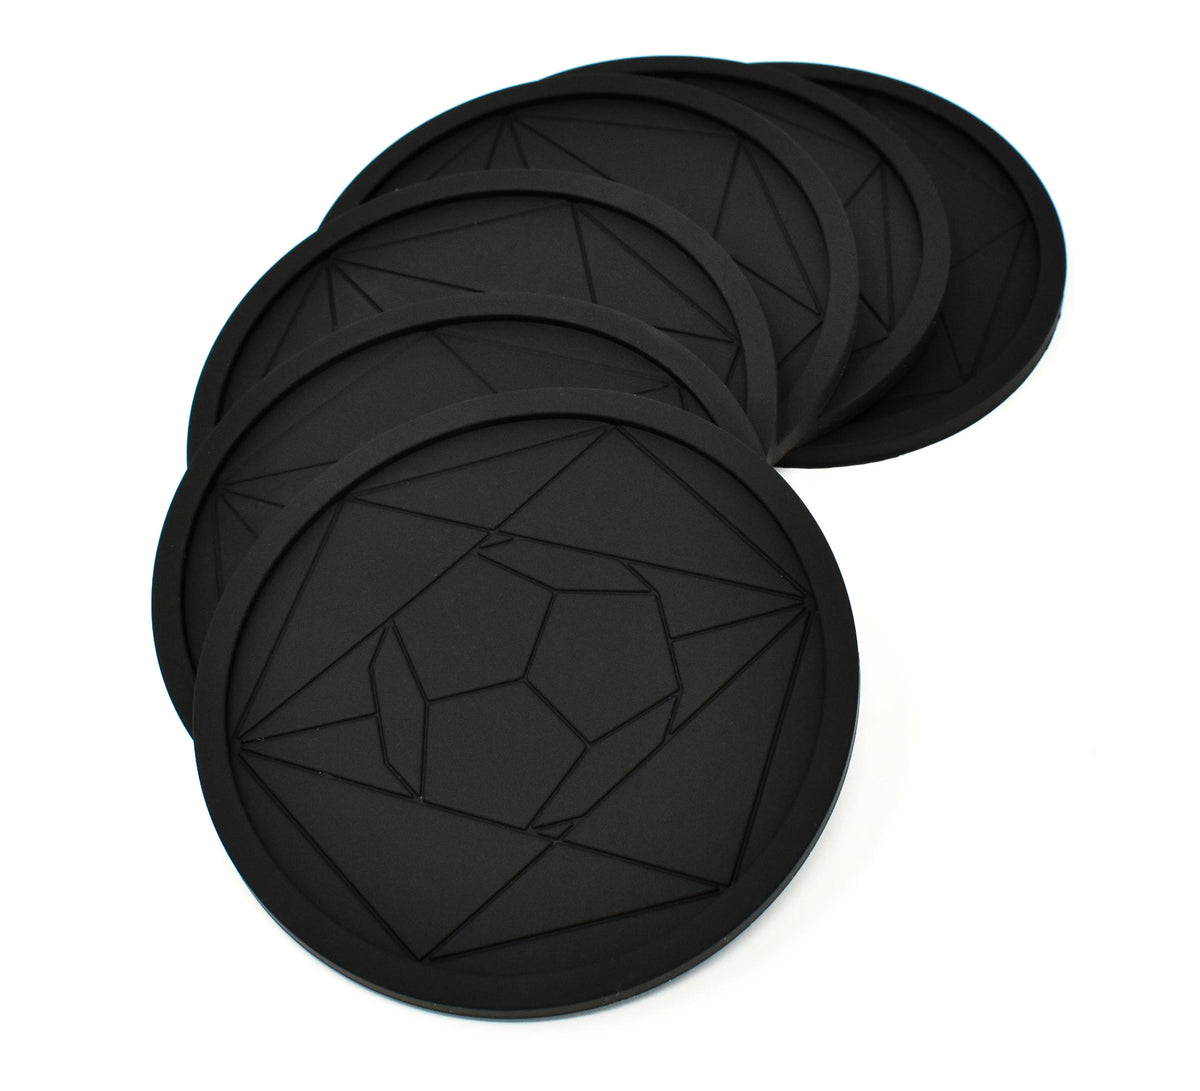 Details about    COASTERS BLACK FLUTED RUBBER  COASTERS TEXTURED BACK  QTY:10 x 100 mm DIA 